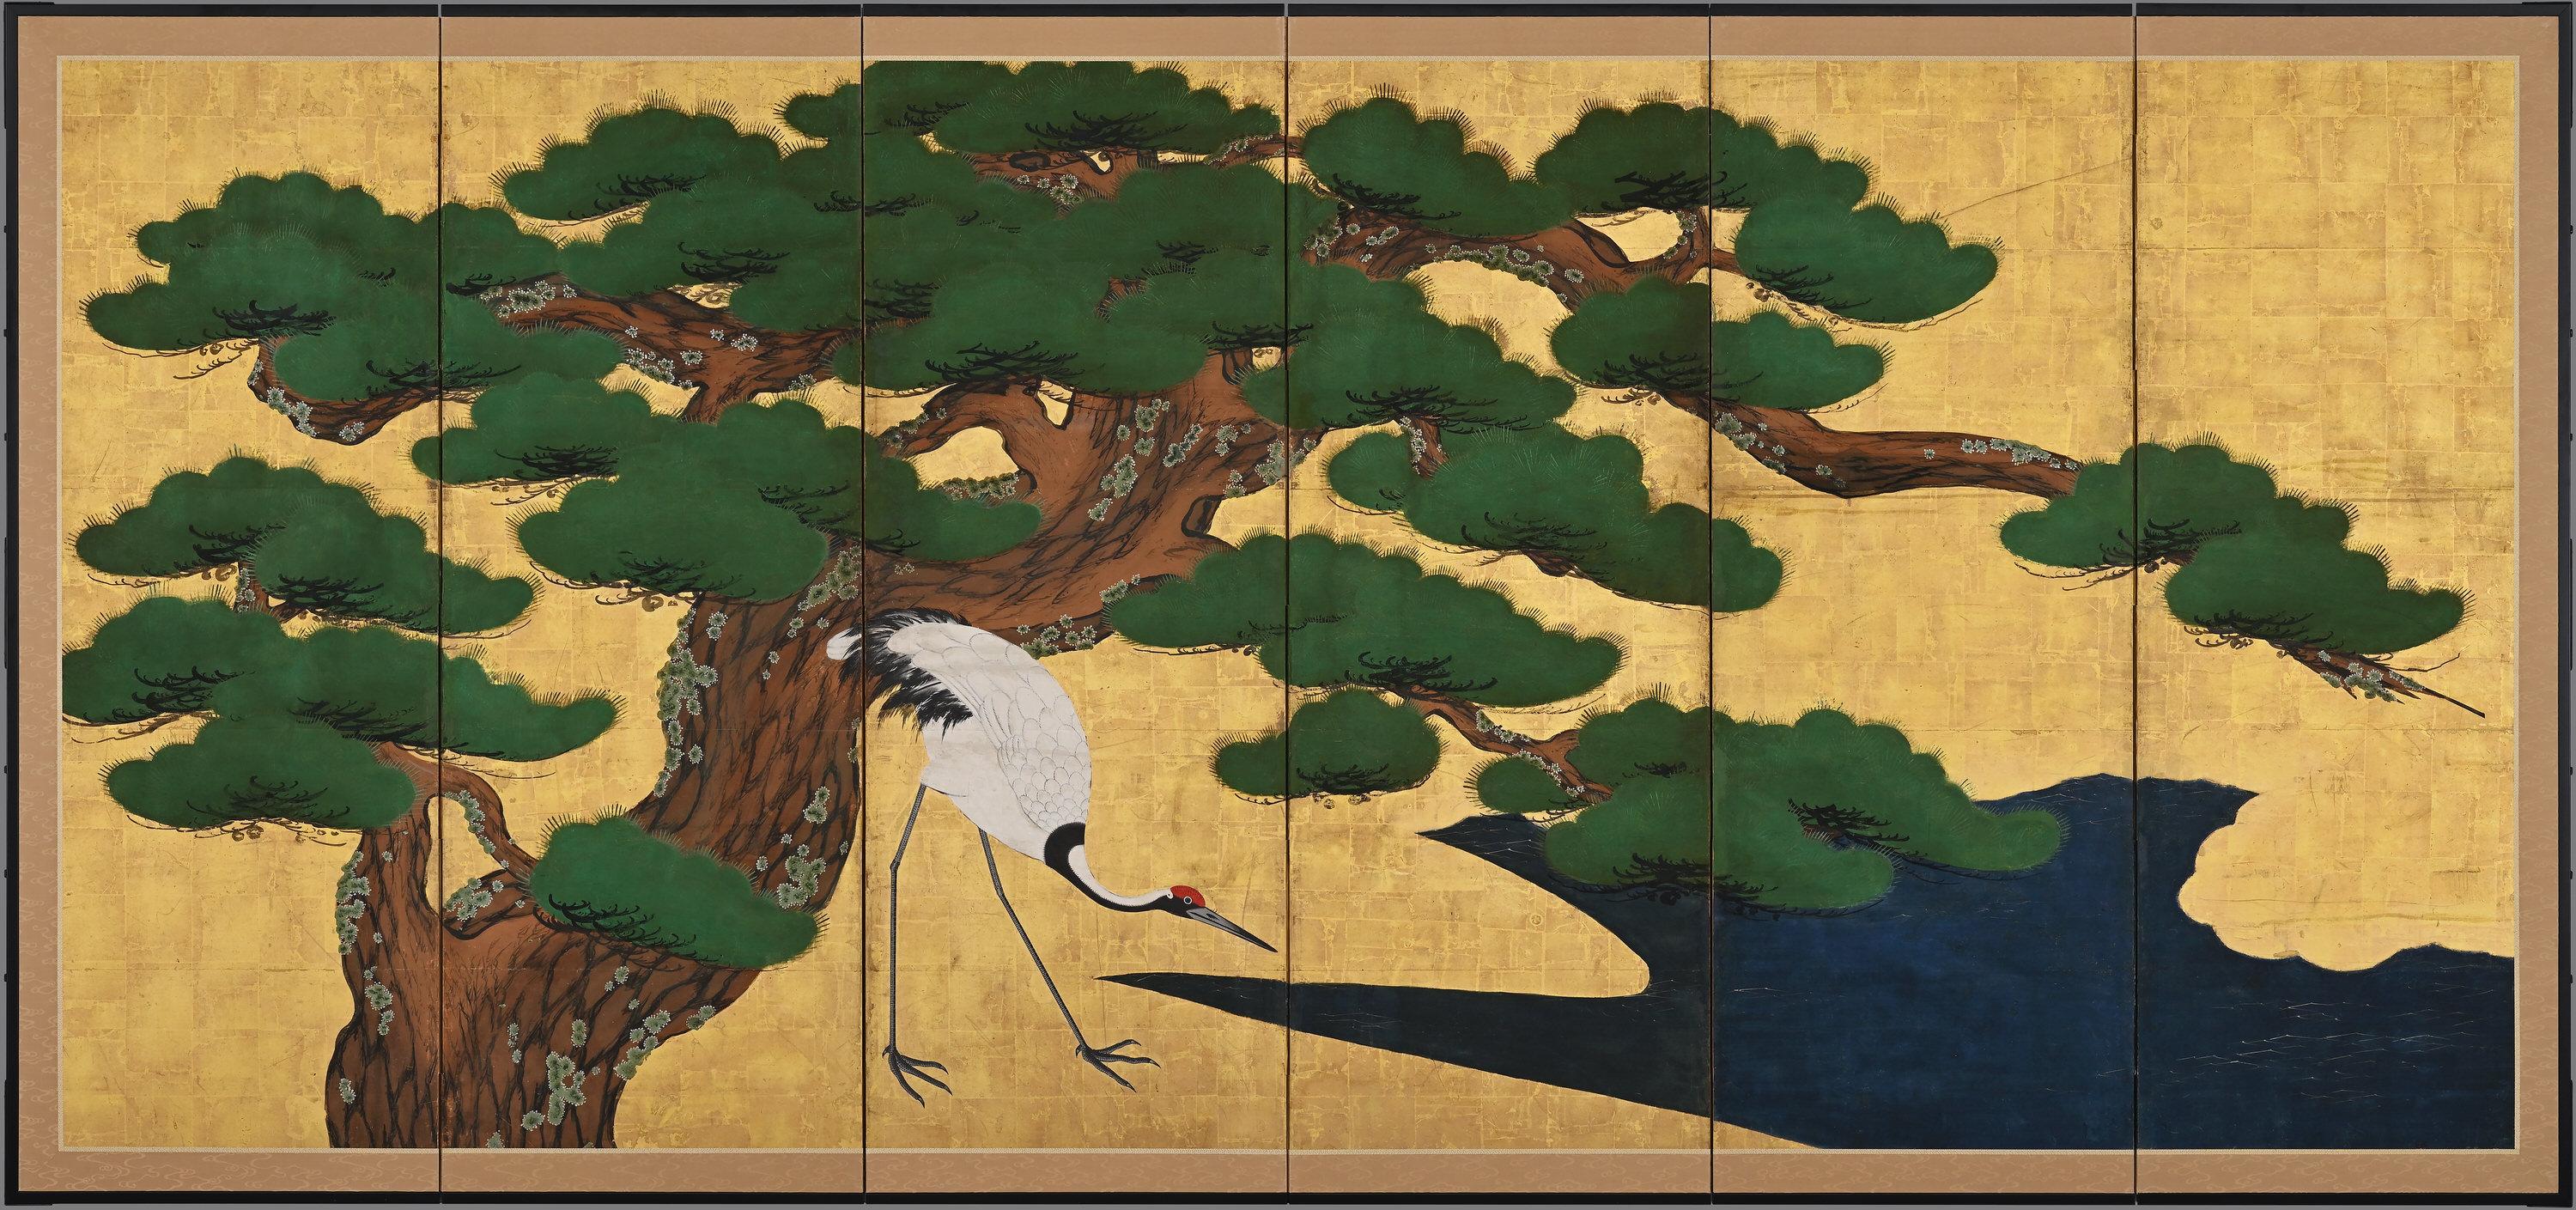 Pines and Cranes

Anonymous. Kyoto Kano School.

Late 17th/early 18th centuries, circa 1700.

Pair of six-panel Japanese folding screens.
Ink, gofun, pigment and gold leaf on paper.

This bold composition presents two pine trees extending